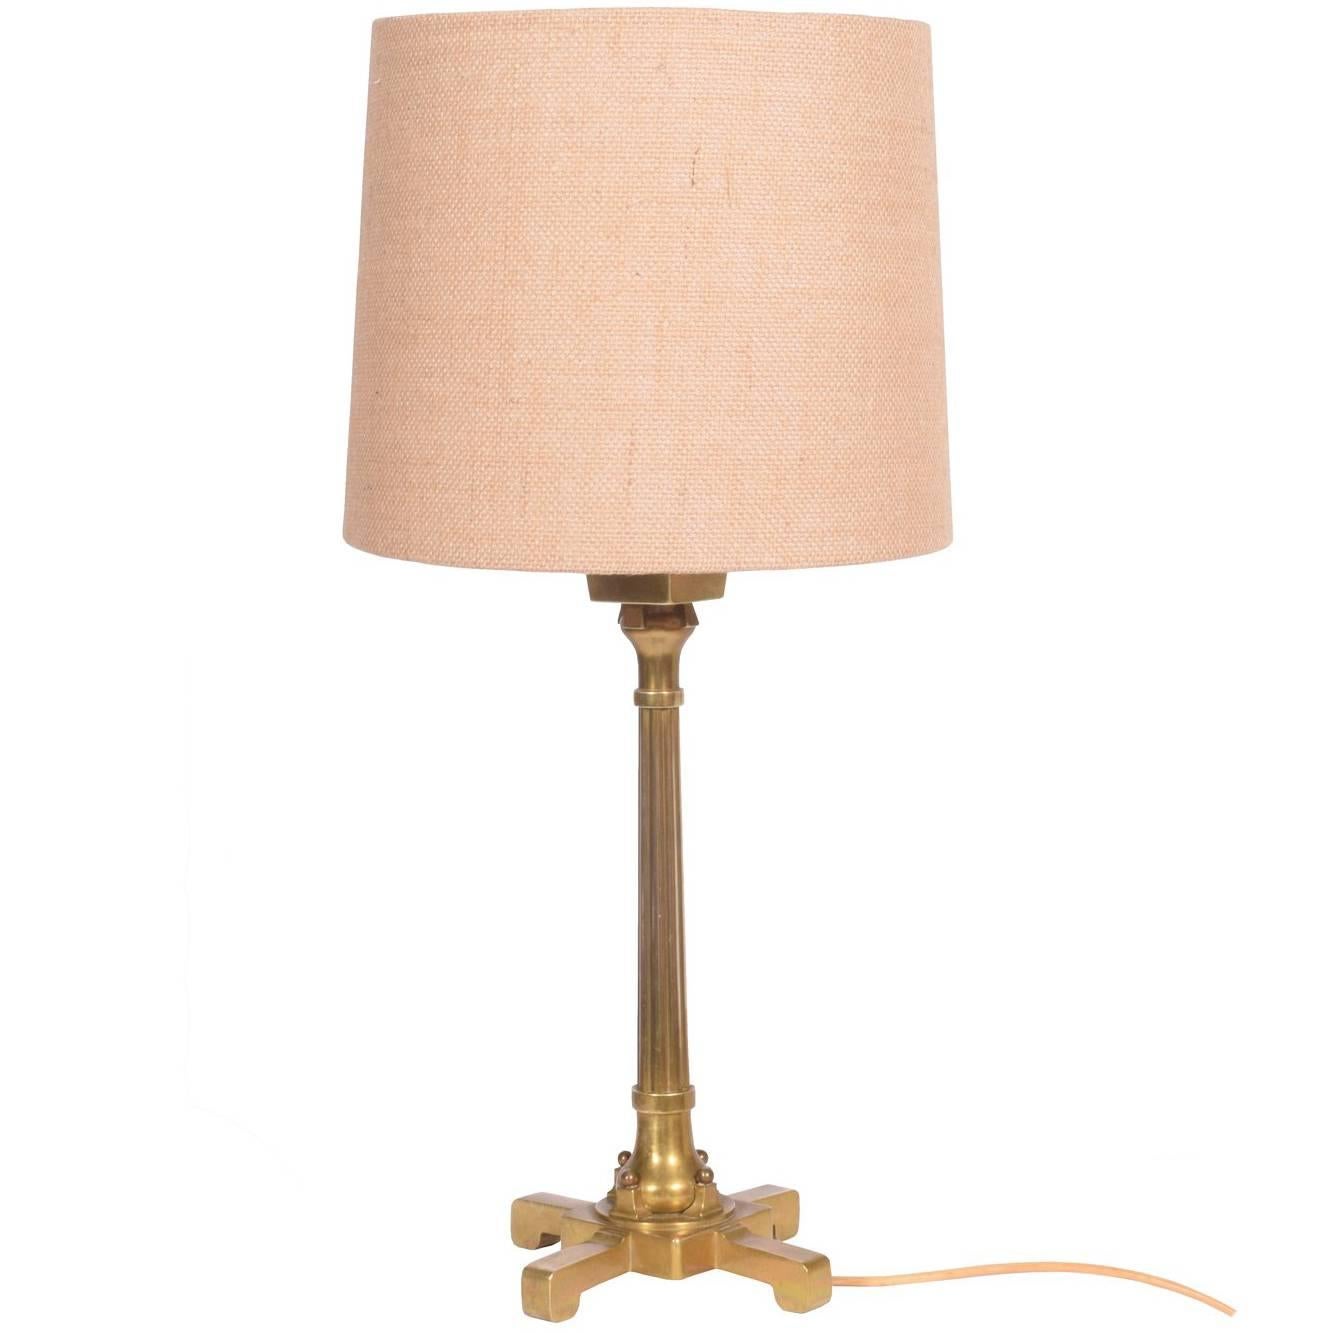 Thorvald Bindesbøll Arts & Craft Brass Table Lamp For Sale